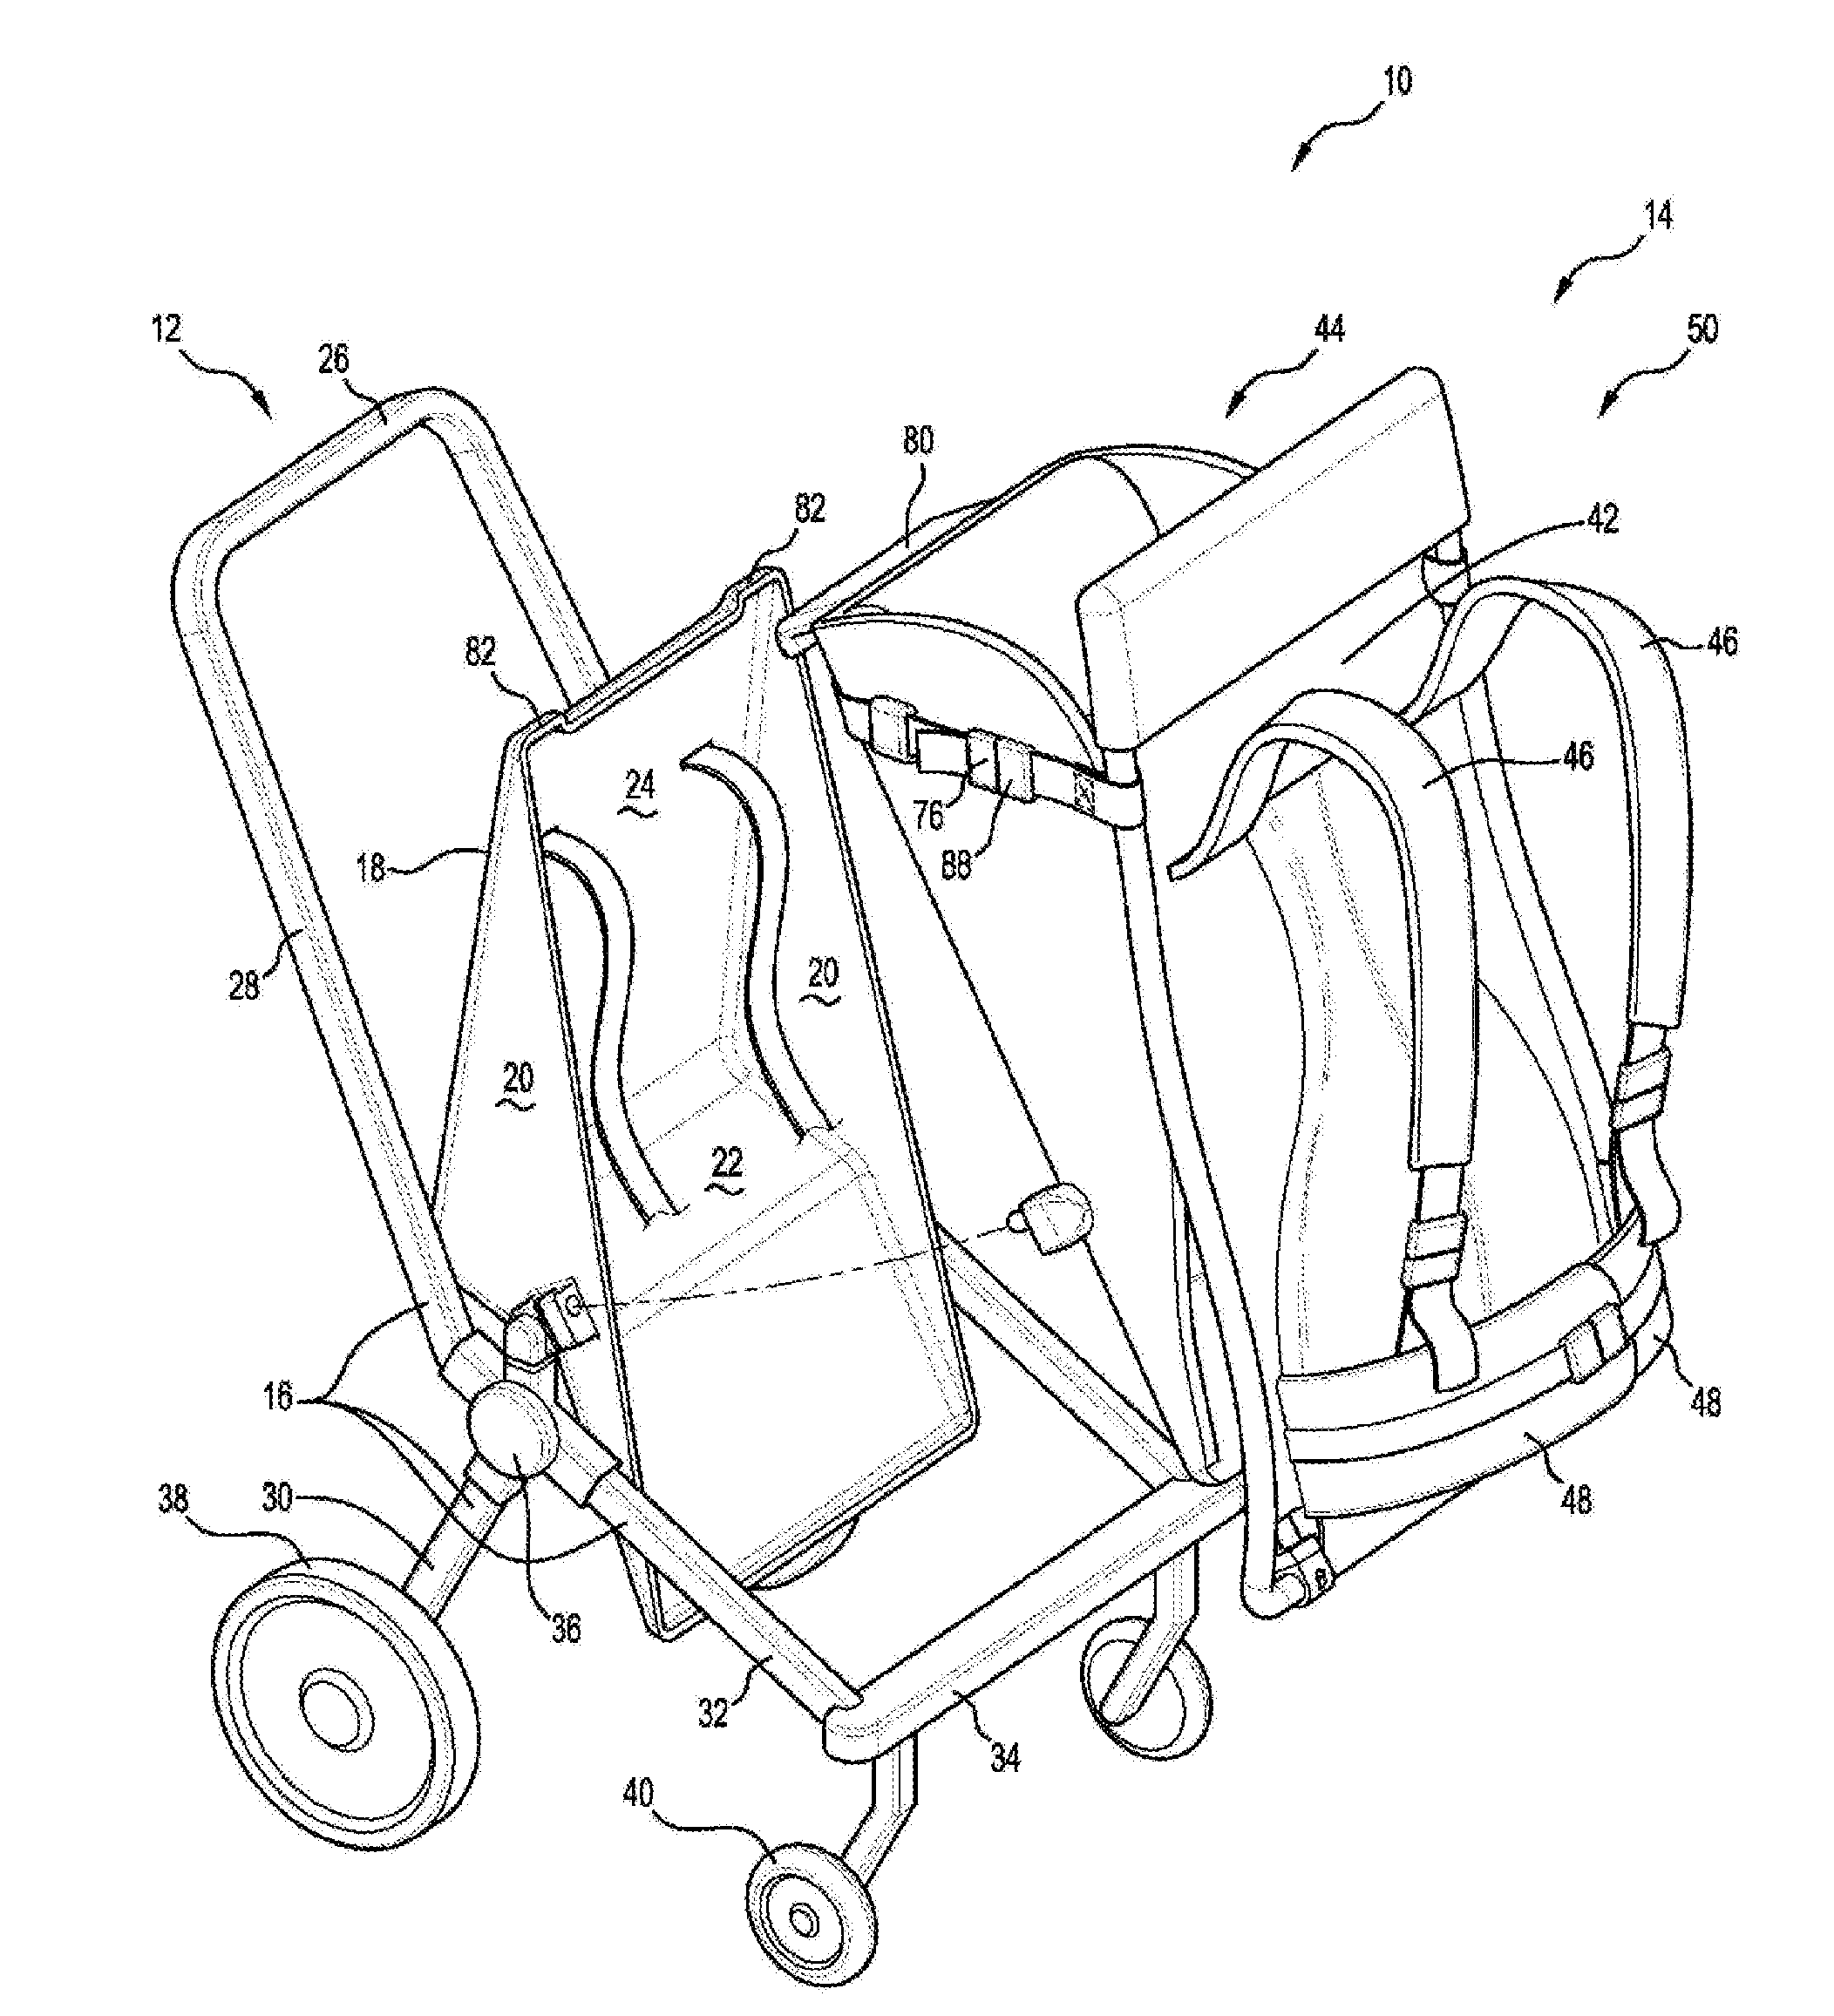 A combination of child carrier and stroller